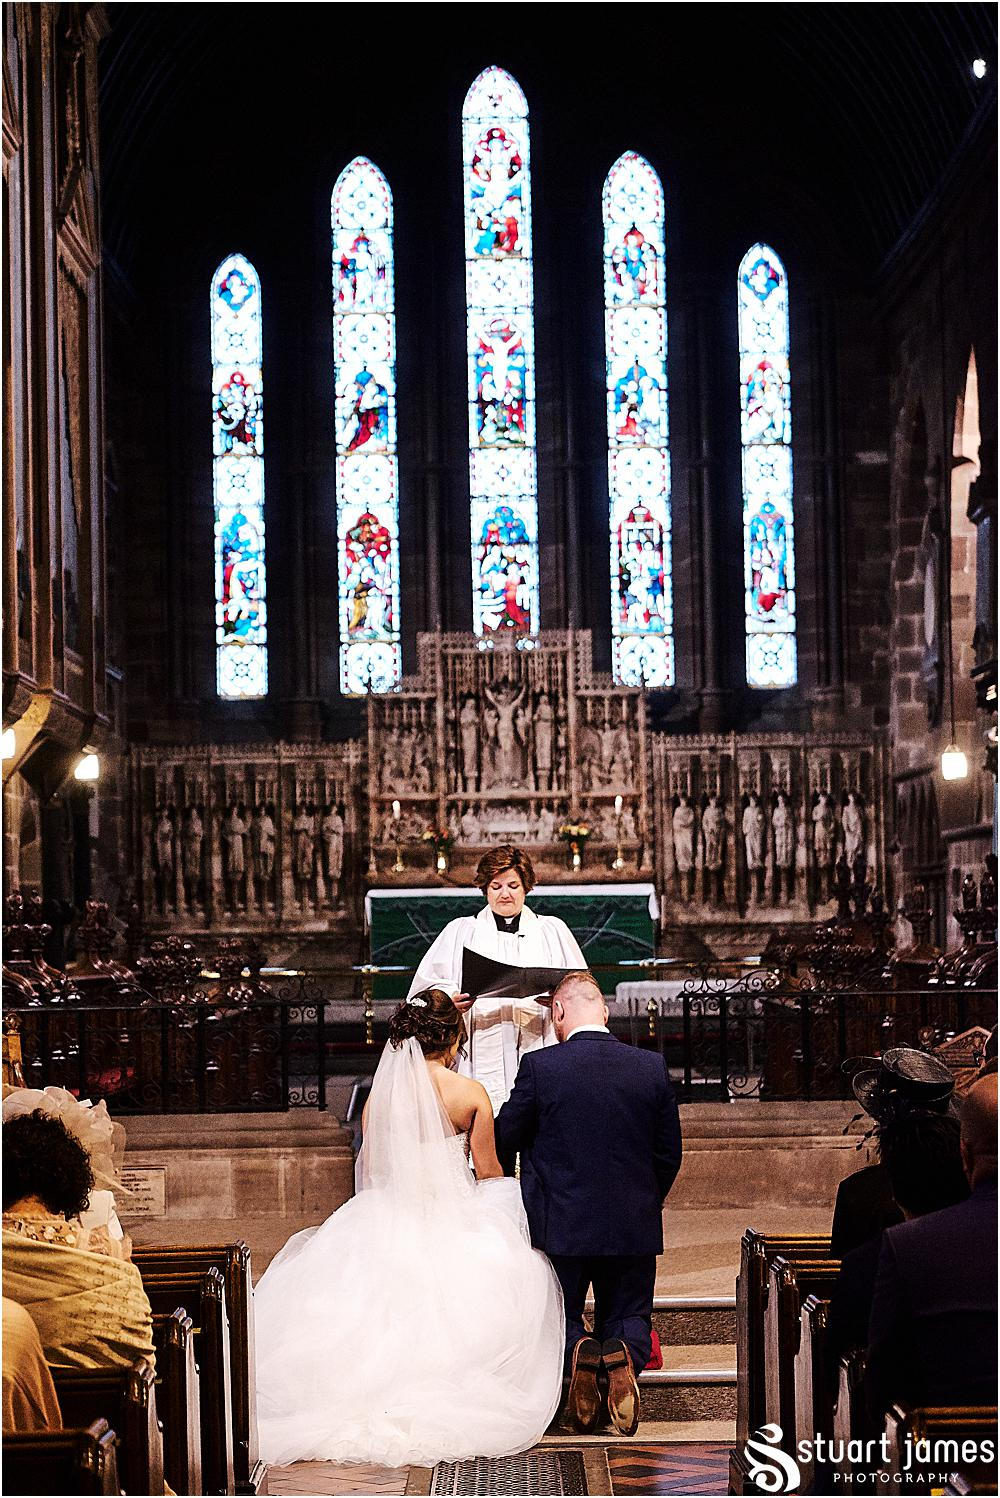 Bride and Groom kneeling at the altar in Chruch, photo by Stuart James Photography at Holy Trinity, Eccleshall